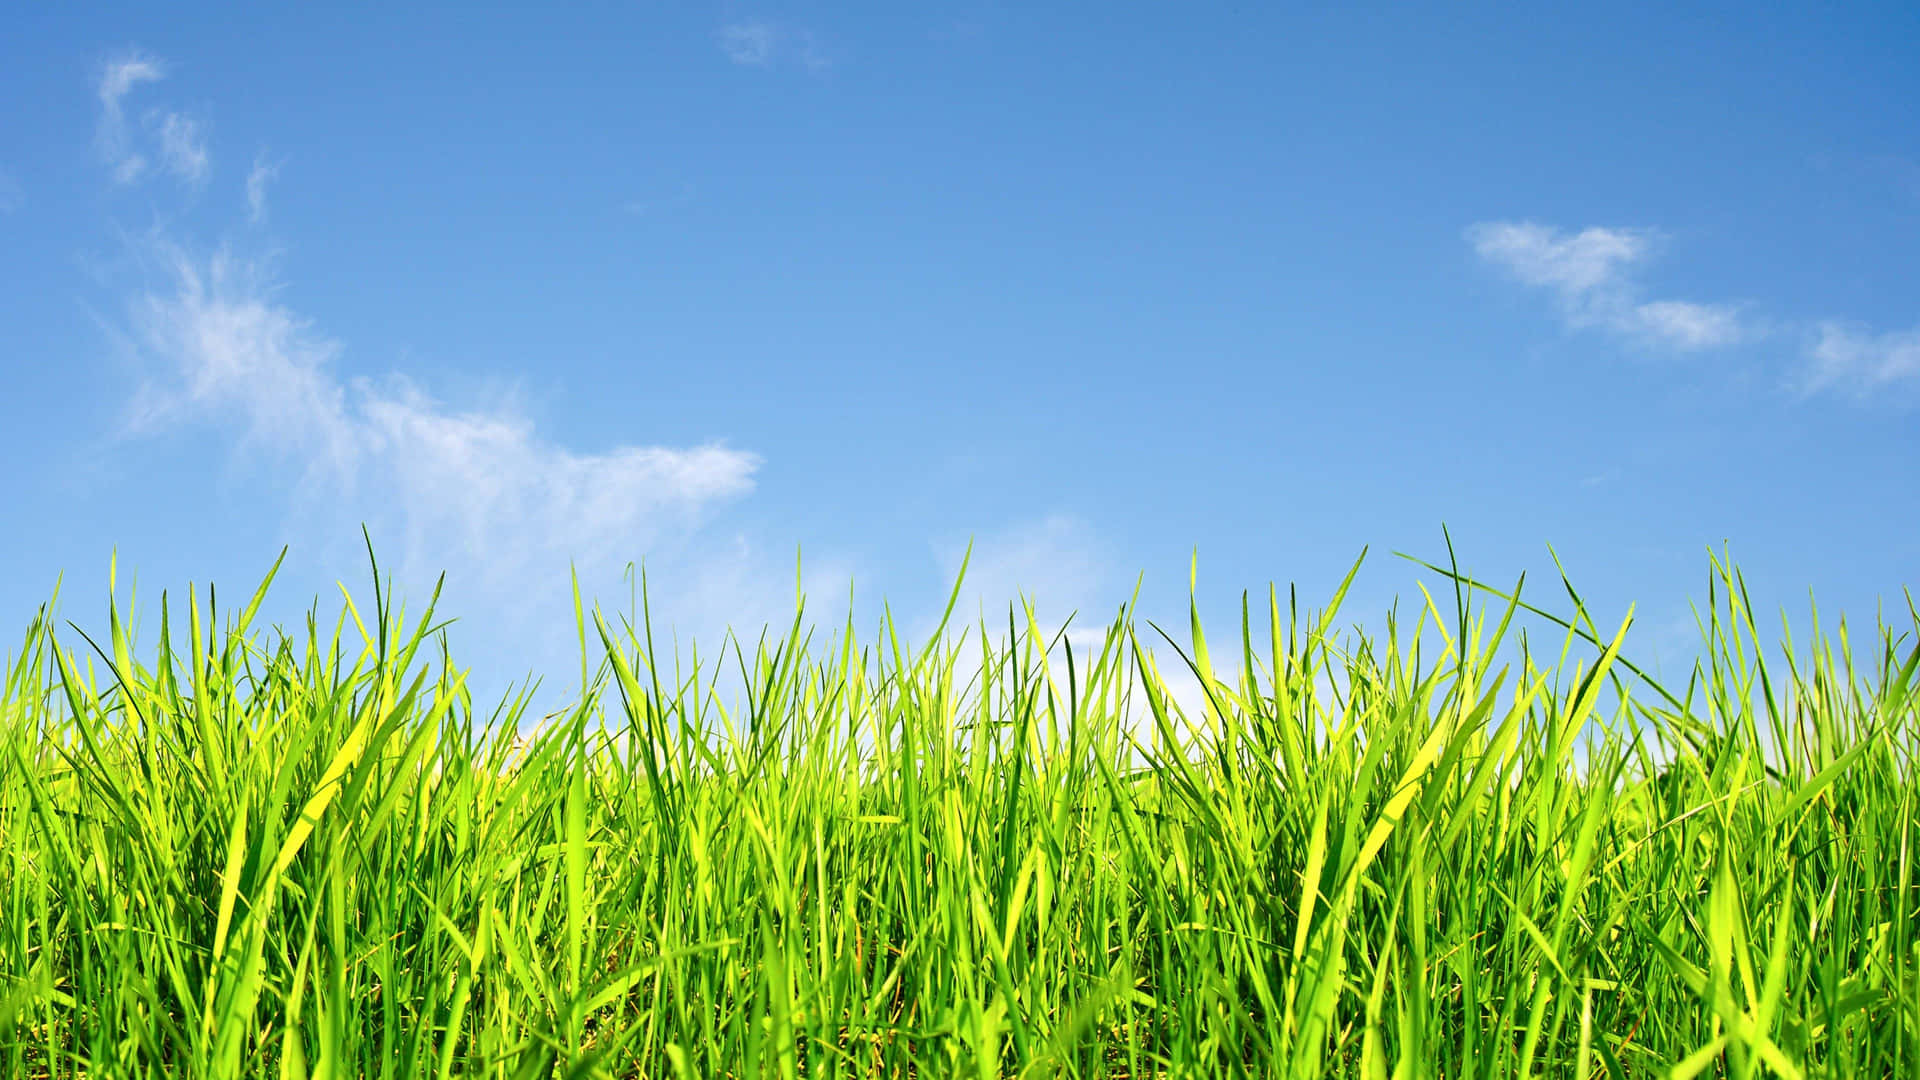 Wheat Grass And Clear Sky Background